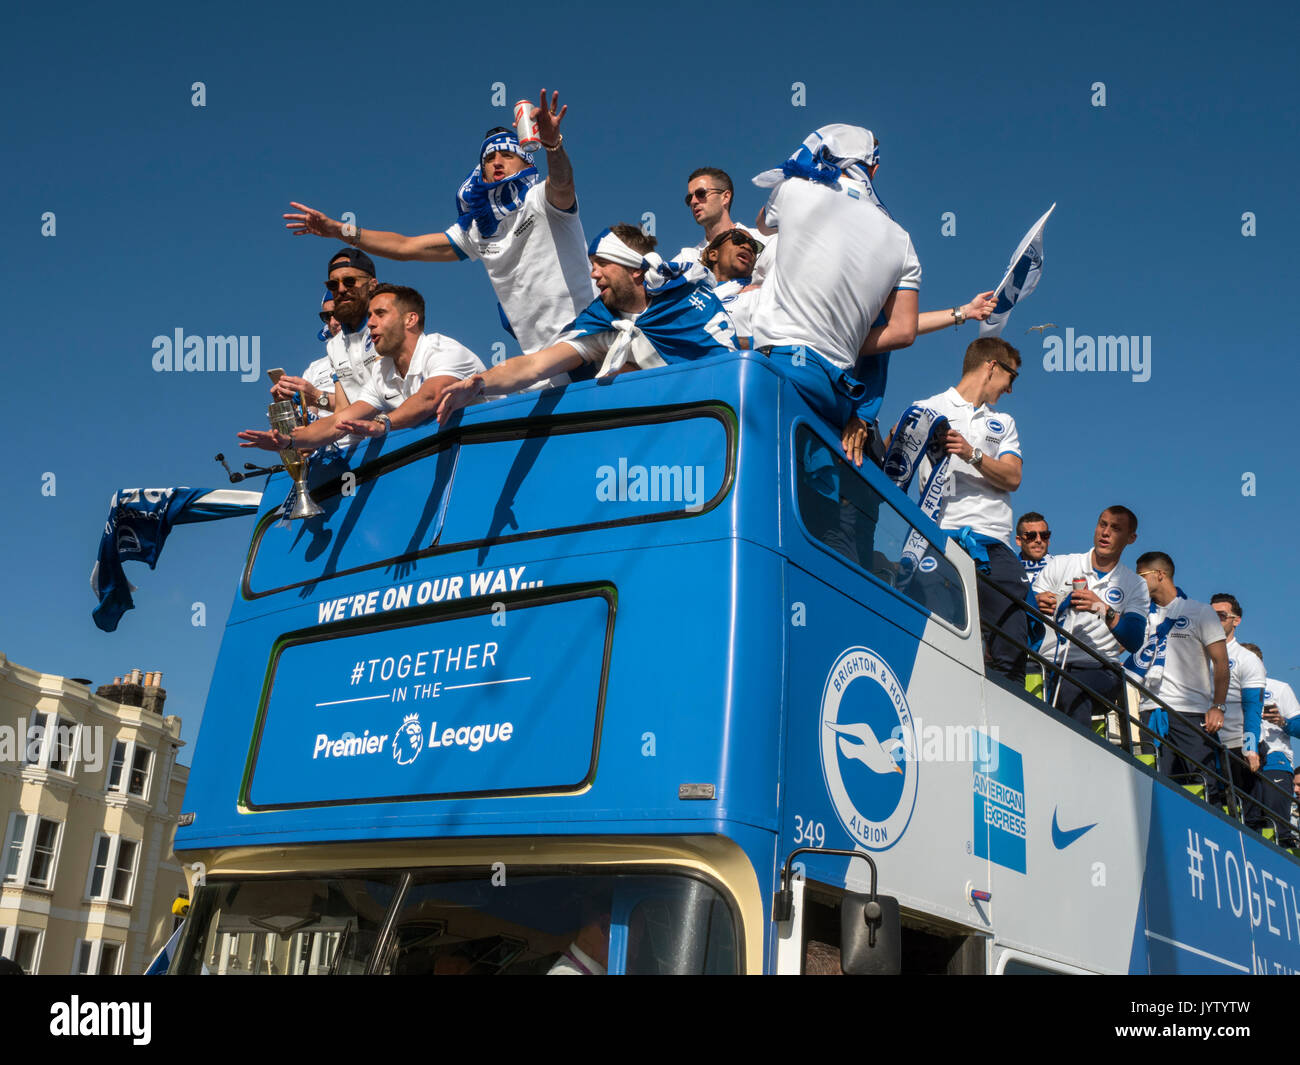 Brighton and Hove Albion, The Seagulls, victory procession through the city in an open-top bus after being promoted to the Premier League in 2017 Stock Photo